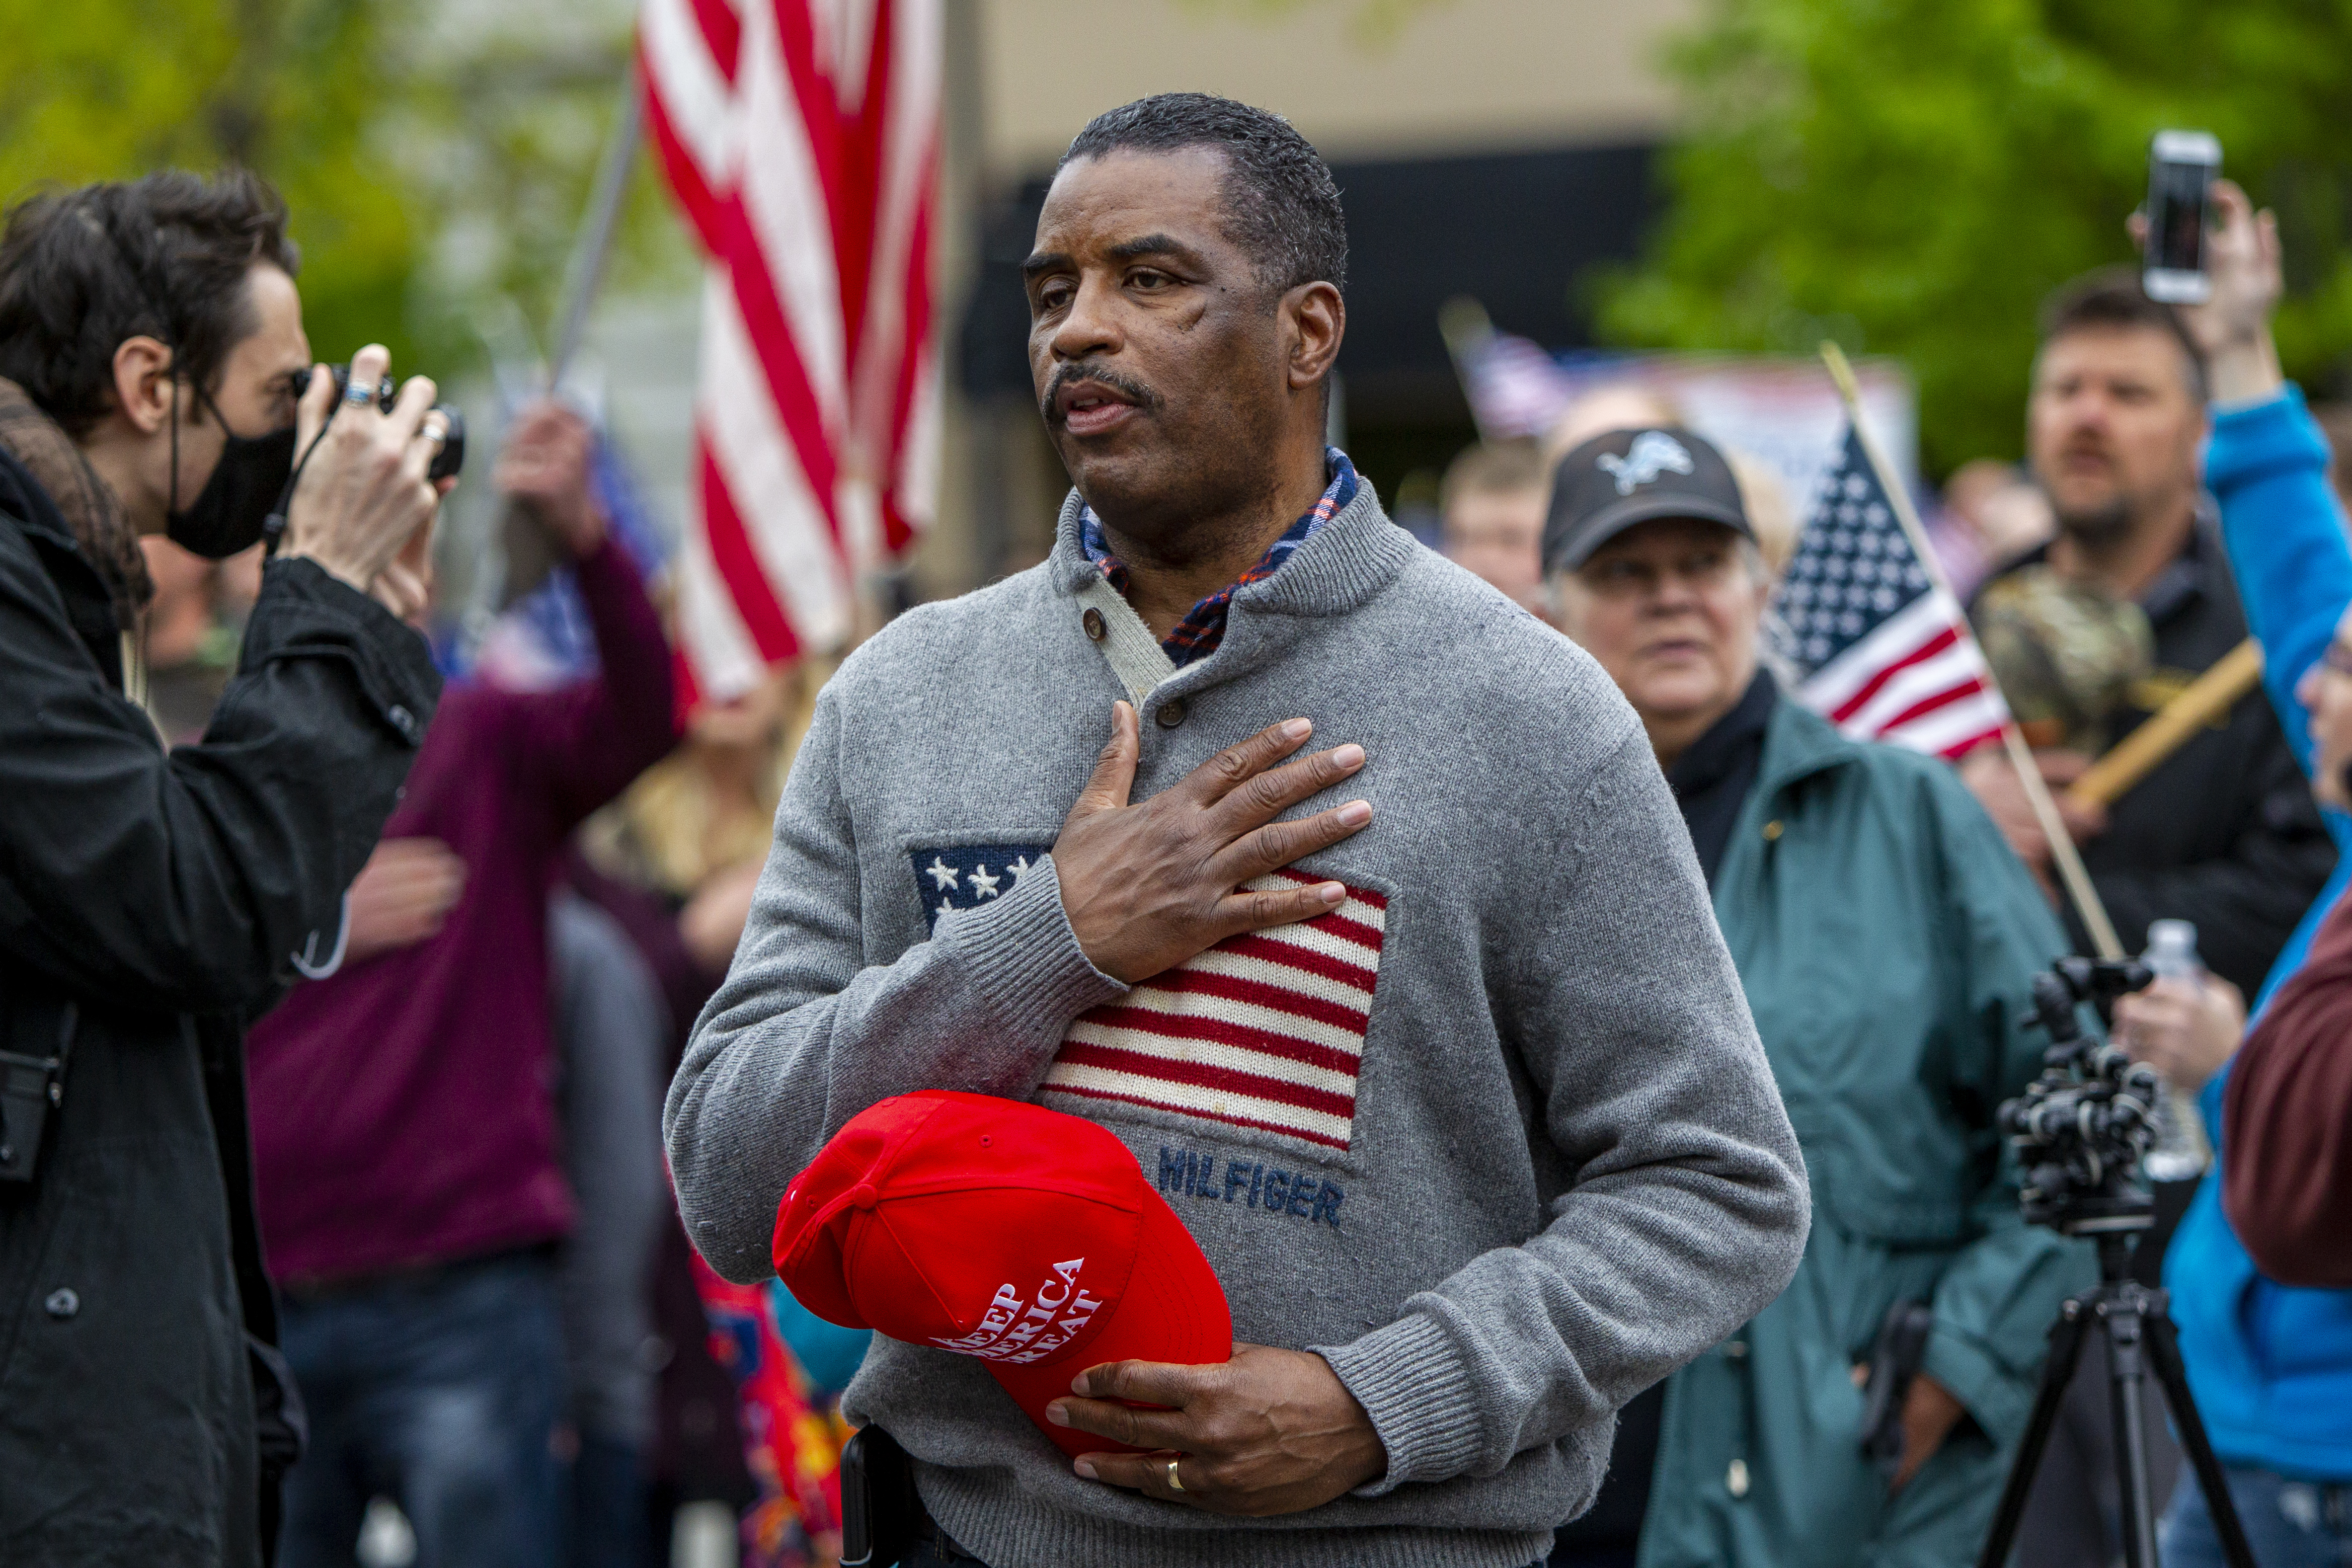 Pastor Philip Smith takes part in the "American Patriot Rally-Sheriffs speak out" event at Rosa Parks Circle in downtown Grand Rapids on Monday, May 18, 2020. The crowd is protesting against Gov. Gretchen Whitmer's stay-at-home order. (Cory Morse | MLive.com)